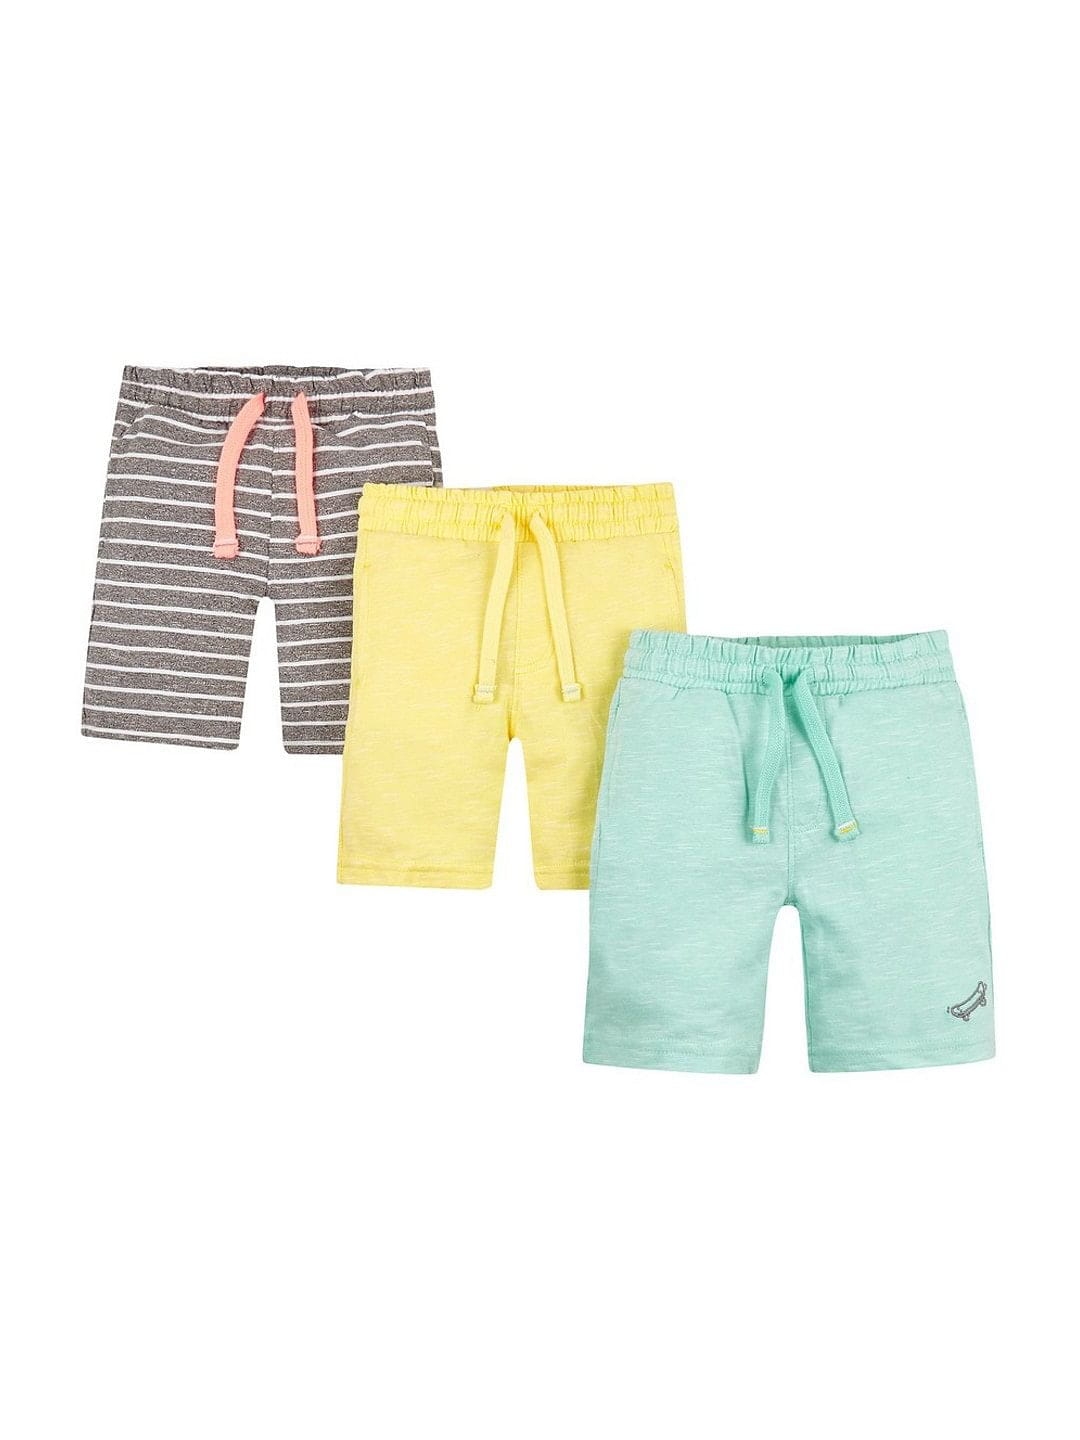 Mothercare | Multicoloured Striped Shorts - Pack of 3 0